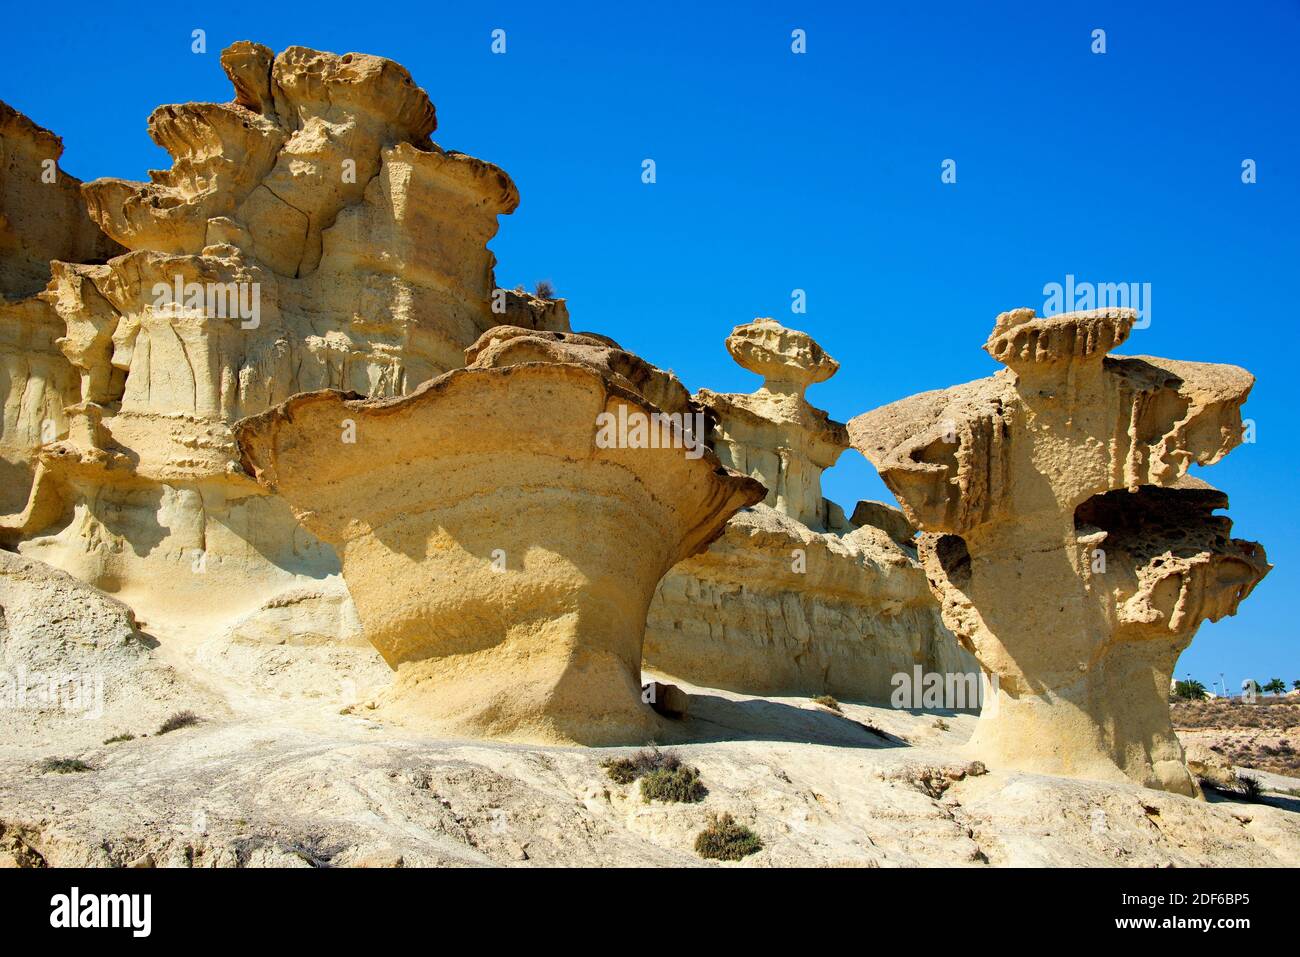 Mushroom rock or pedestal rock. Mushroom rocks are deformed for erosion or weathering. Usually found in desert or arid areas. This photo was taken in Stock Photo